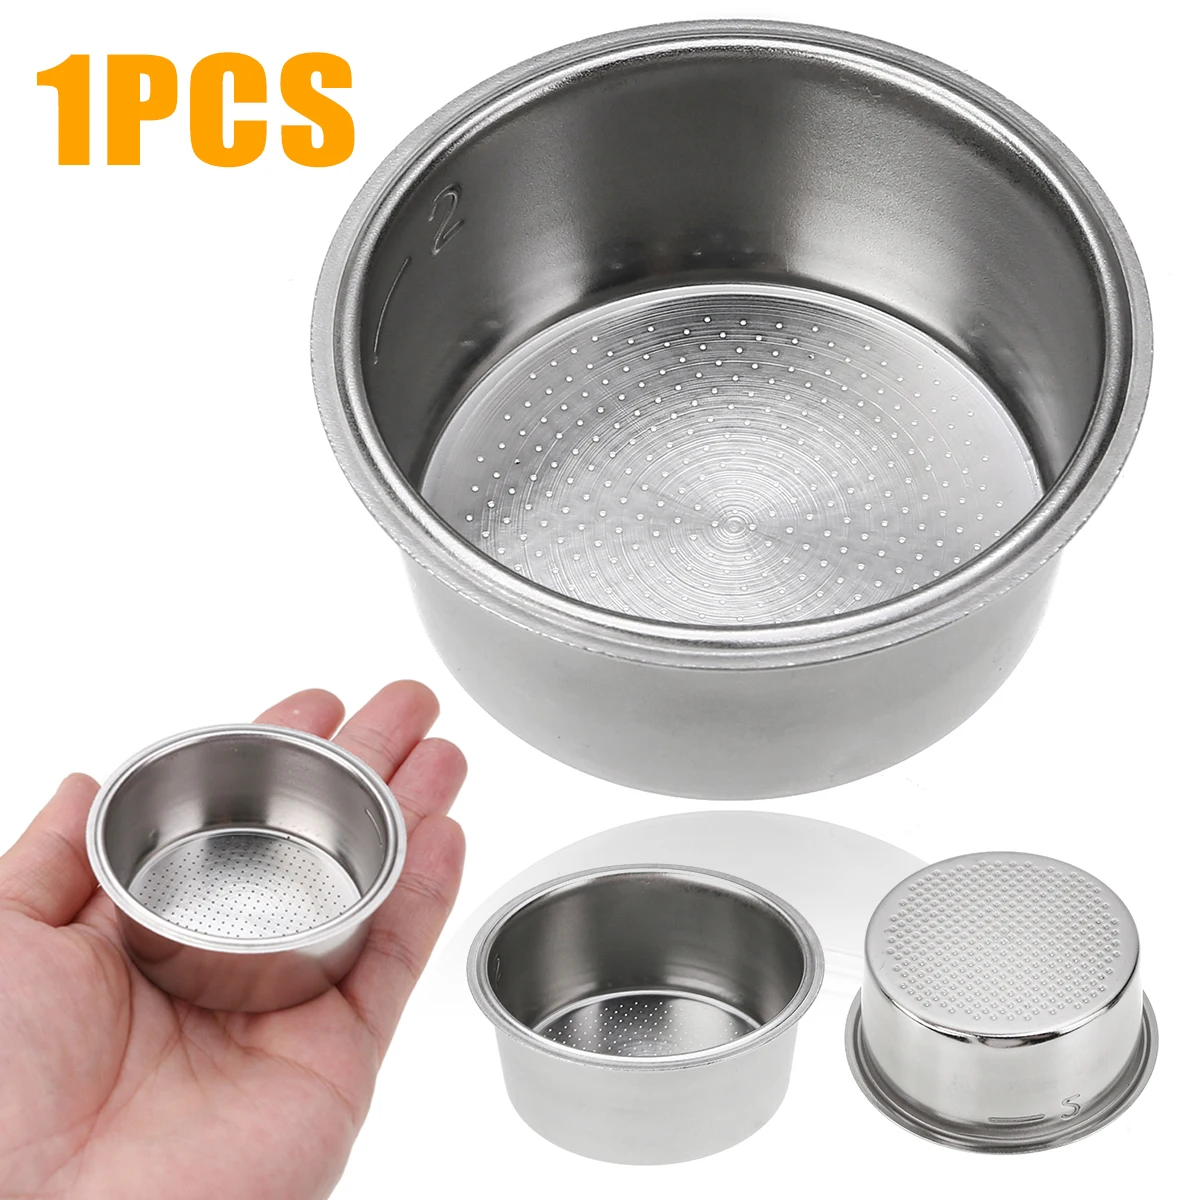 Mayitr Stainless Steel Coffee Filter Basket Non Pressurized Coffee Filter For Kitchen Coffee Machine Accessories